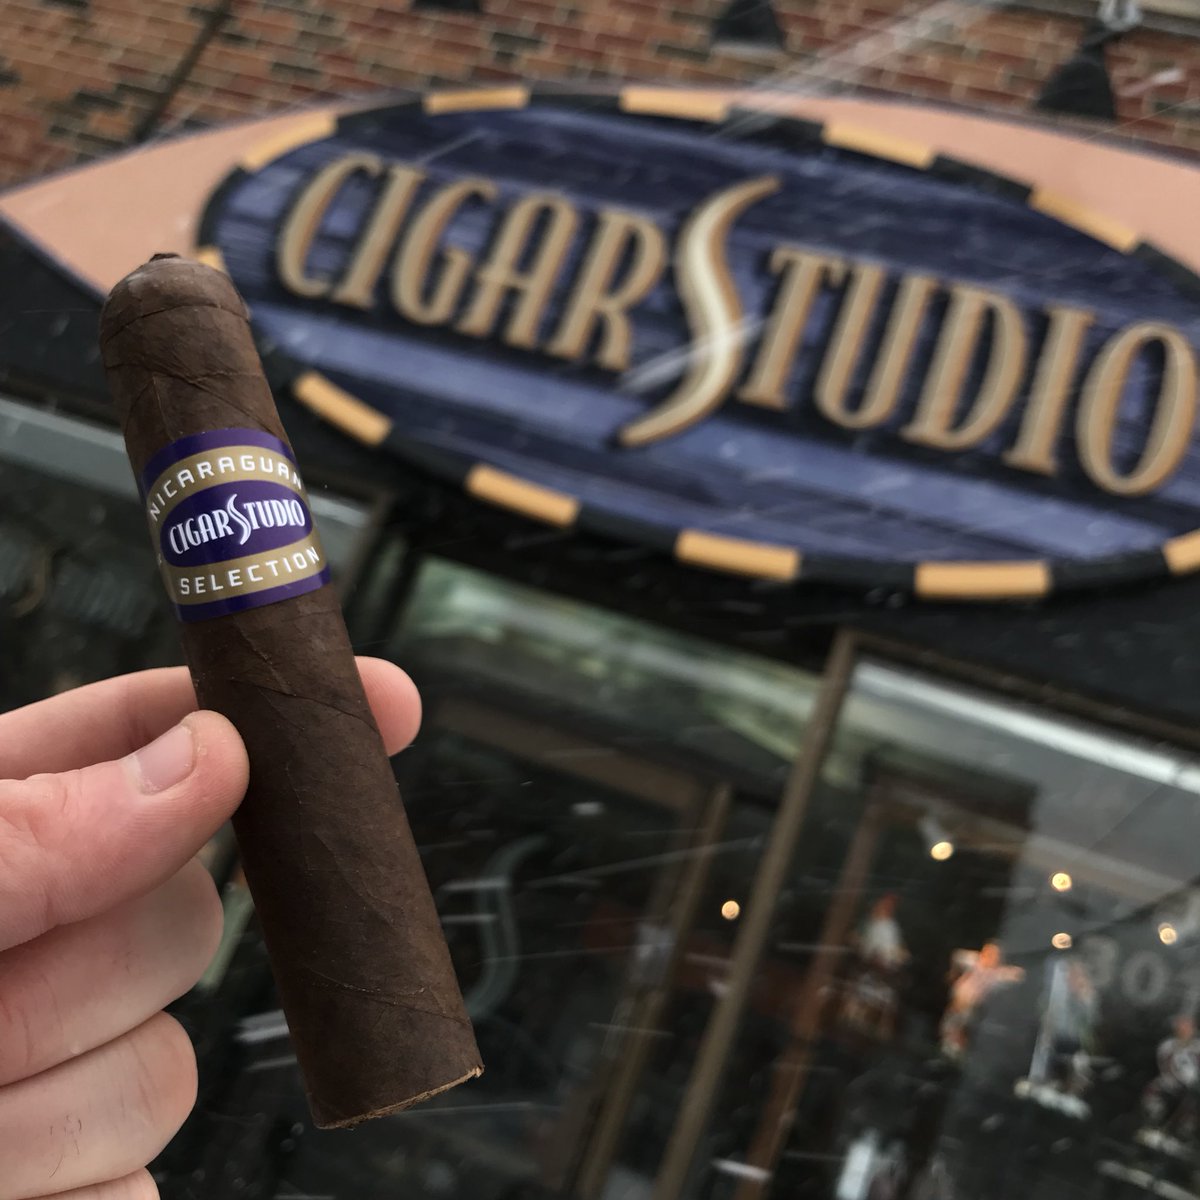 “Have no fear, Cigar Studio is hear and near and open in spite of what the weather gods have thrown at us.” Open today Noon till 5 #whereisspring #openforbusiness #open7daysaweek #cigarstudio #cigars #cigarcommunity #cigarcommunitytoronto #cigarstudioselect #cigarstudioapproved